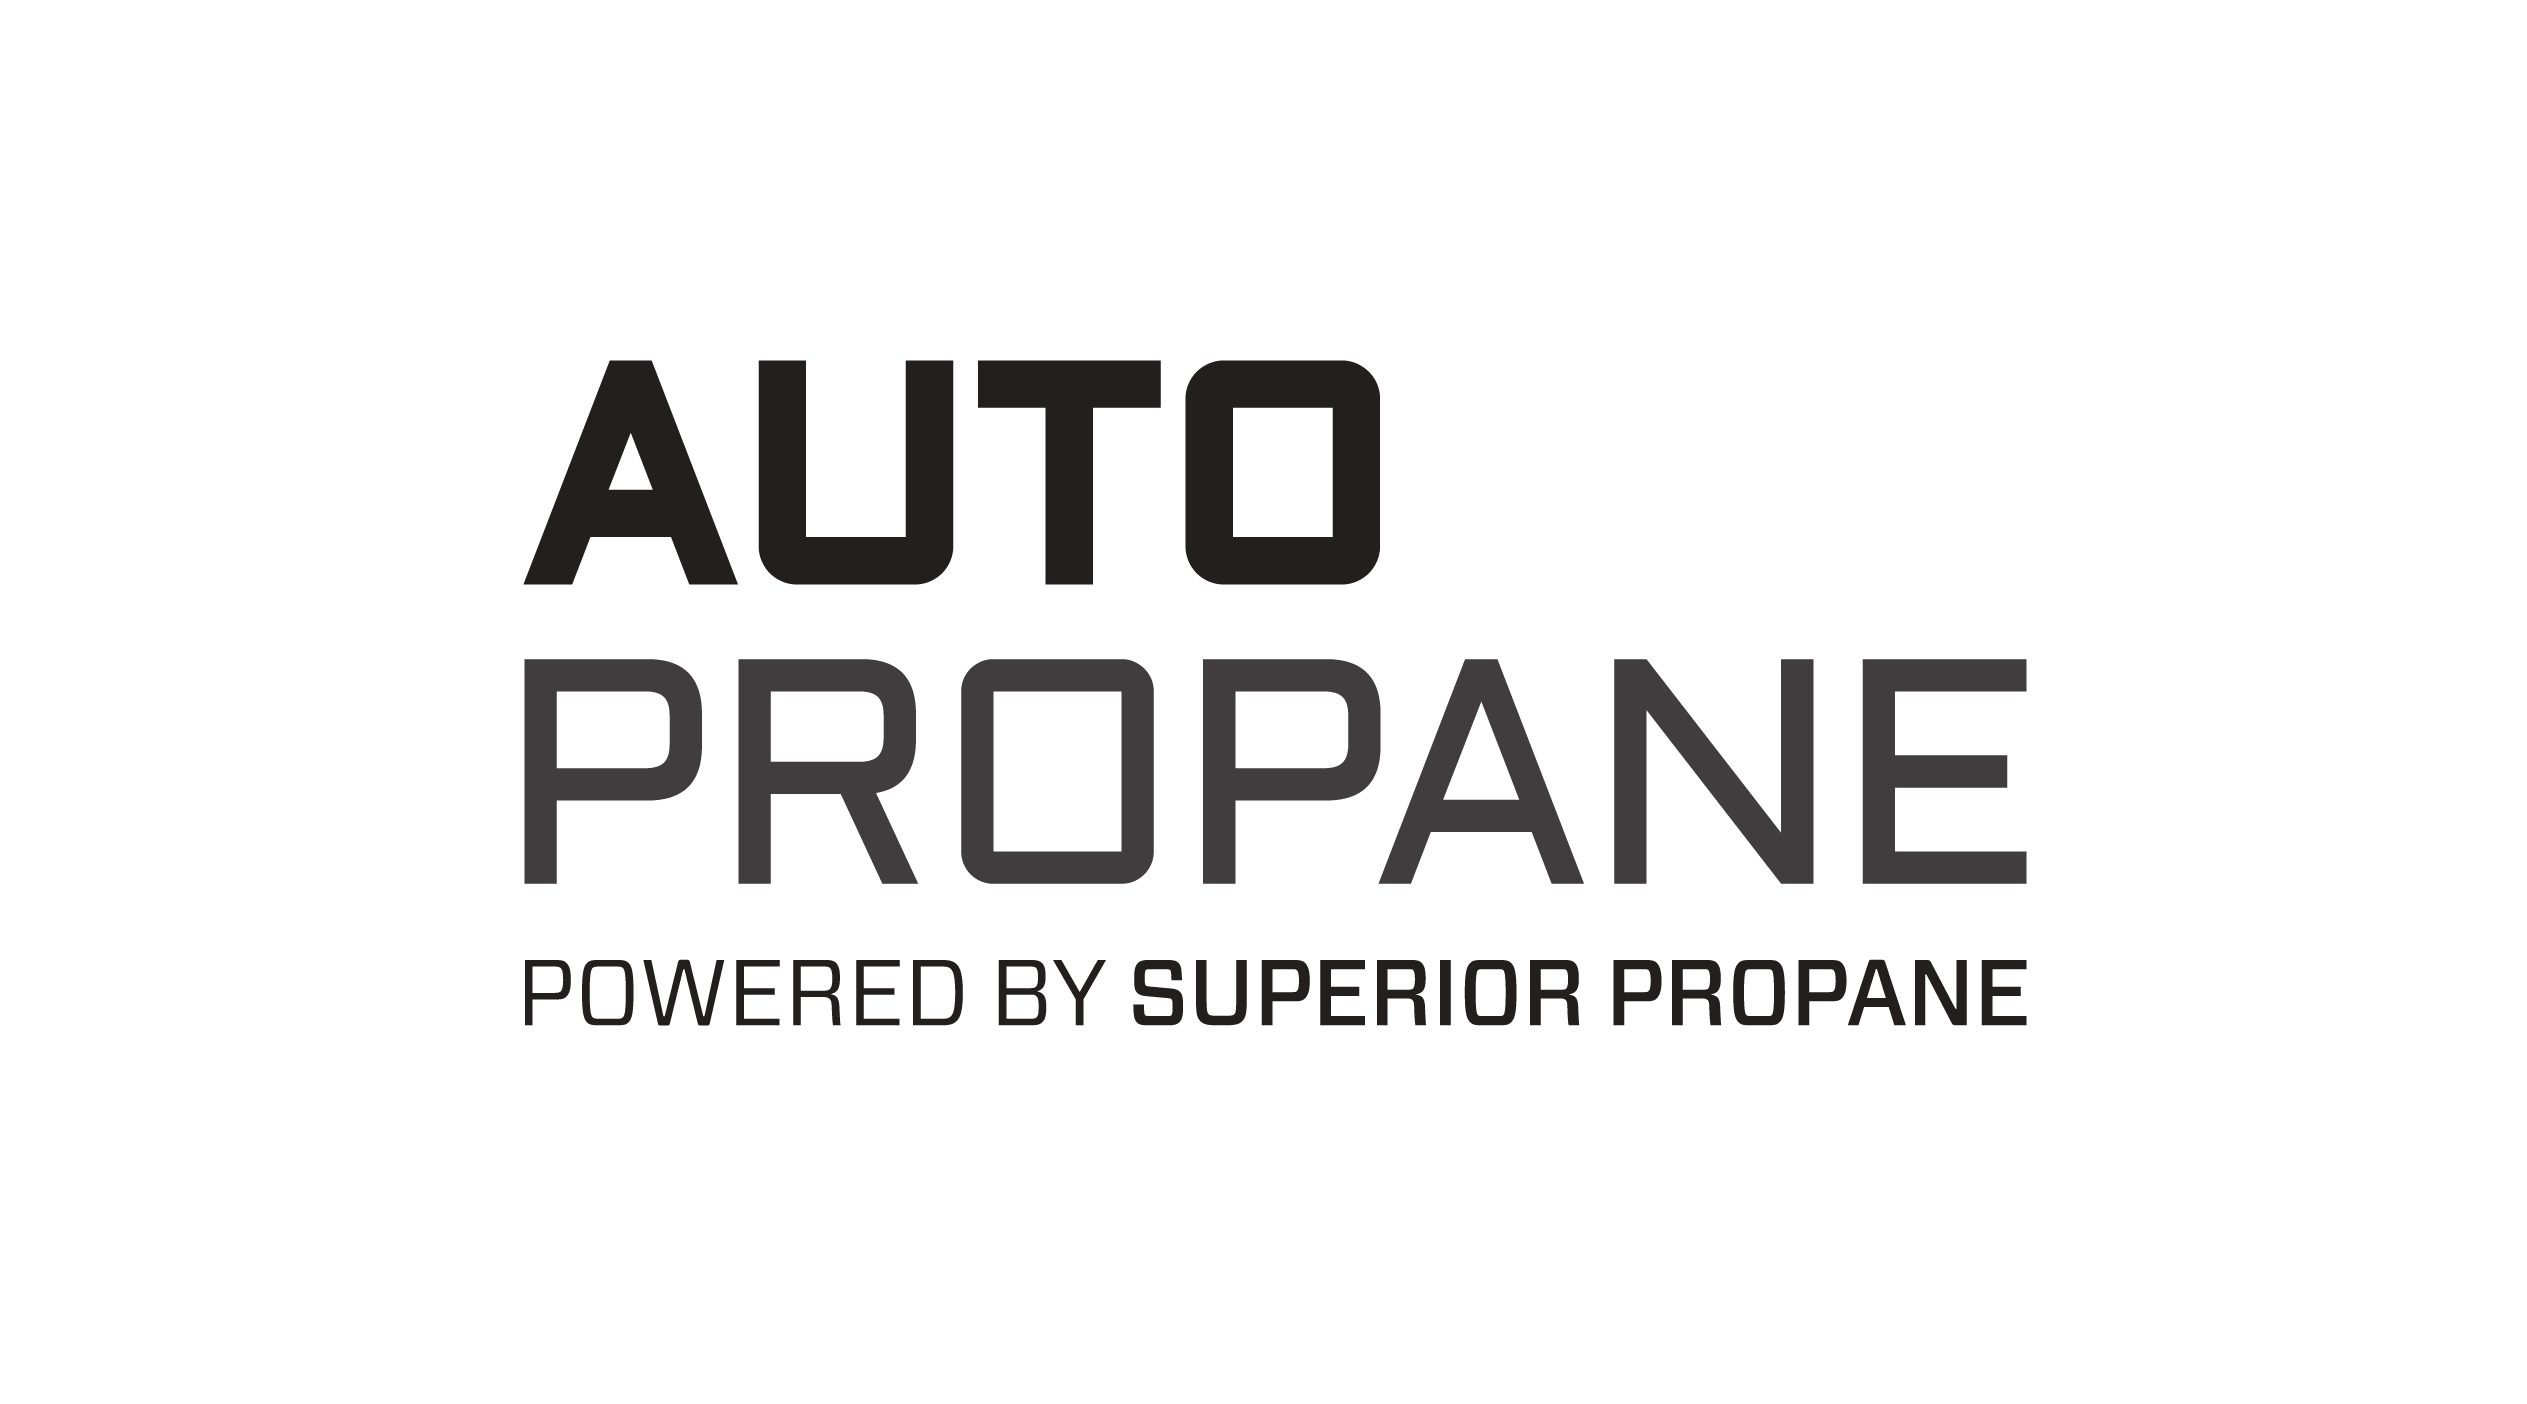 Auto Propane Powered by Superior